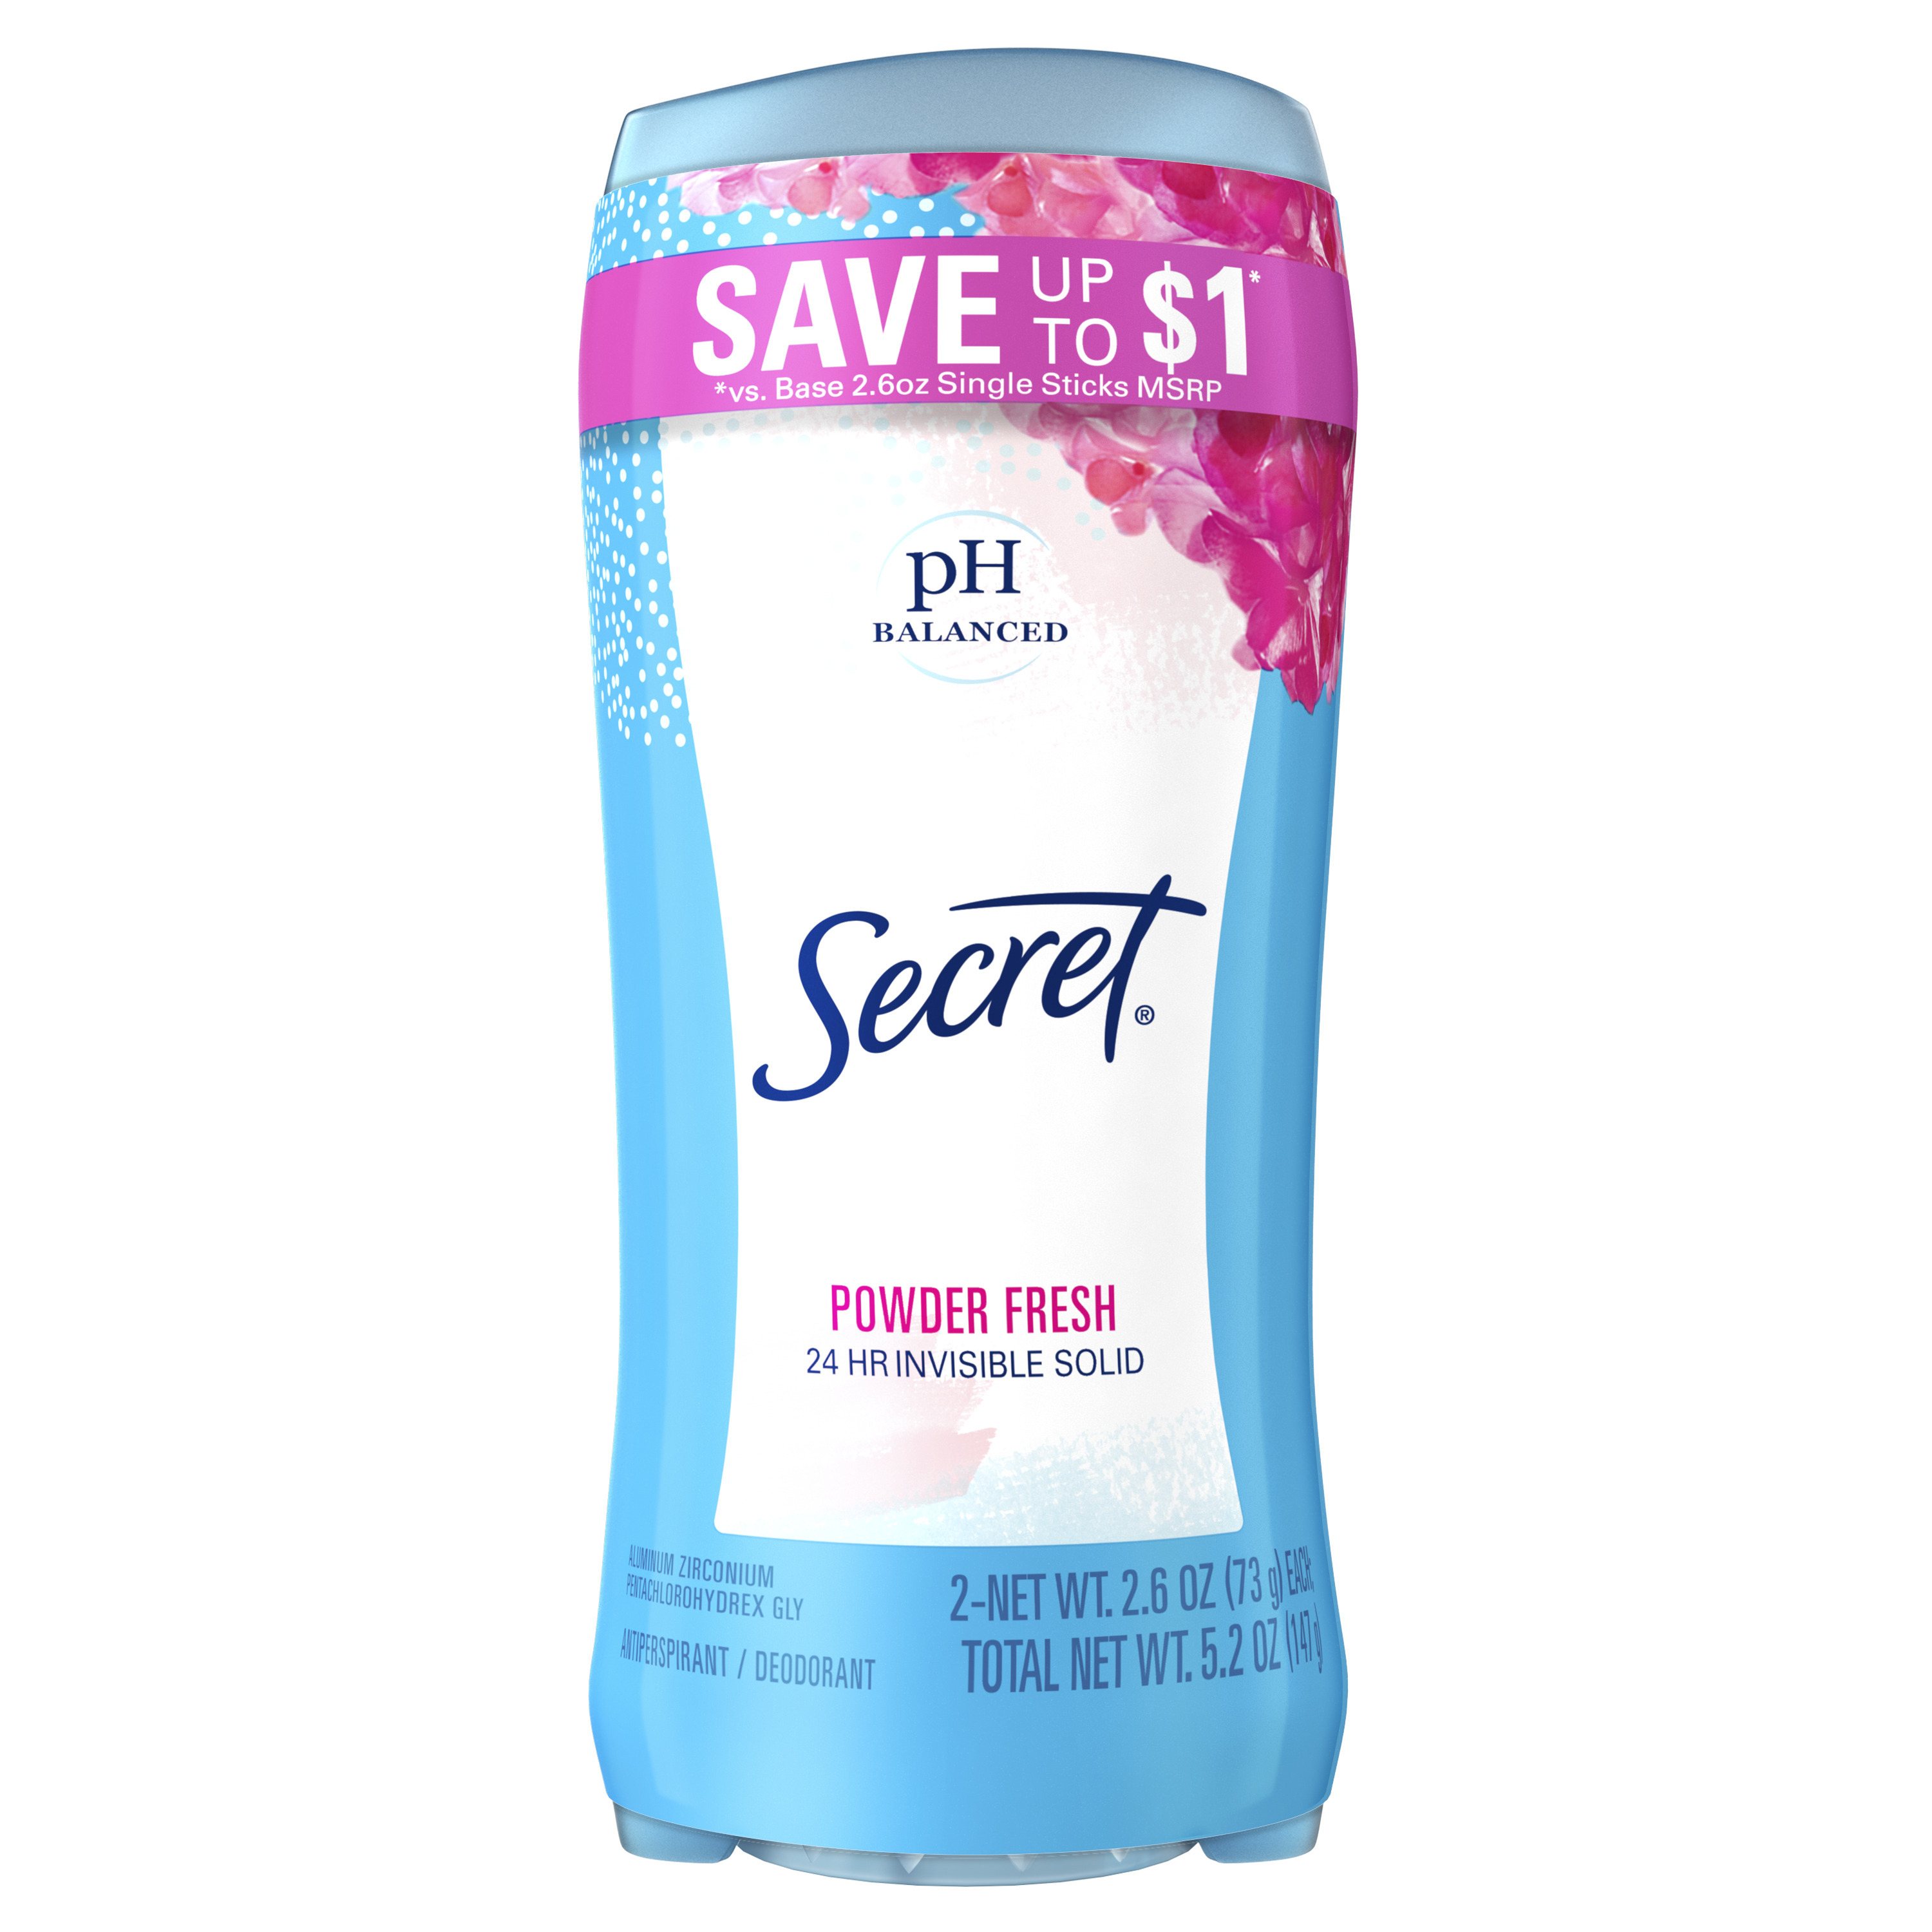 Secret Invisible Solid Women's Antiperspirant and Deodorant, Powder Fresh, Twin Pack, 2.6 oz Each - image 1 of 8